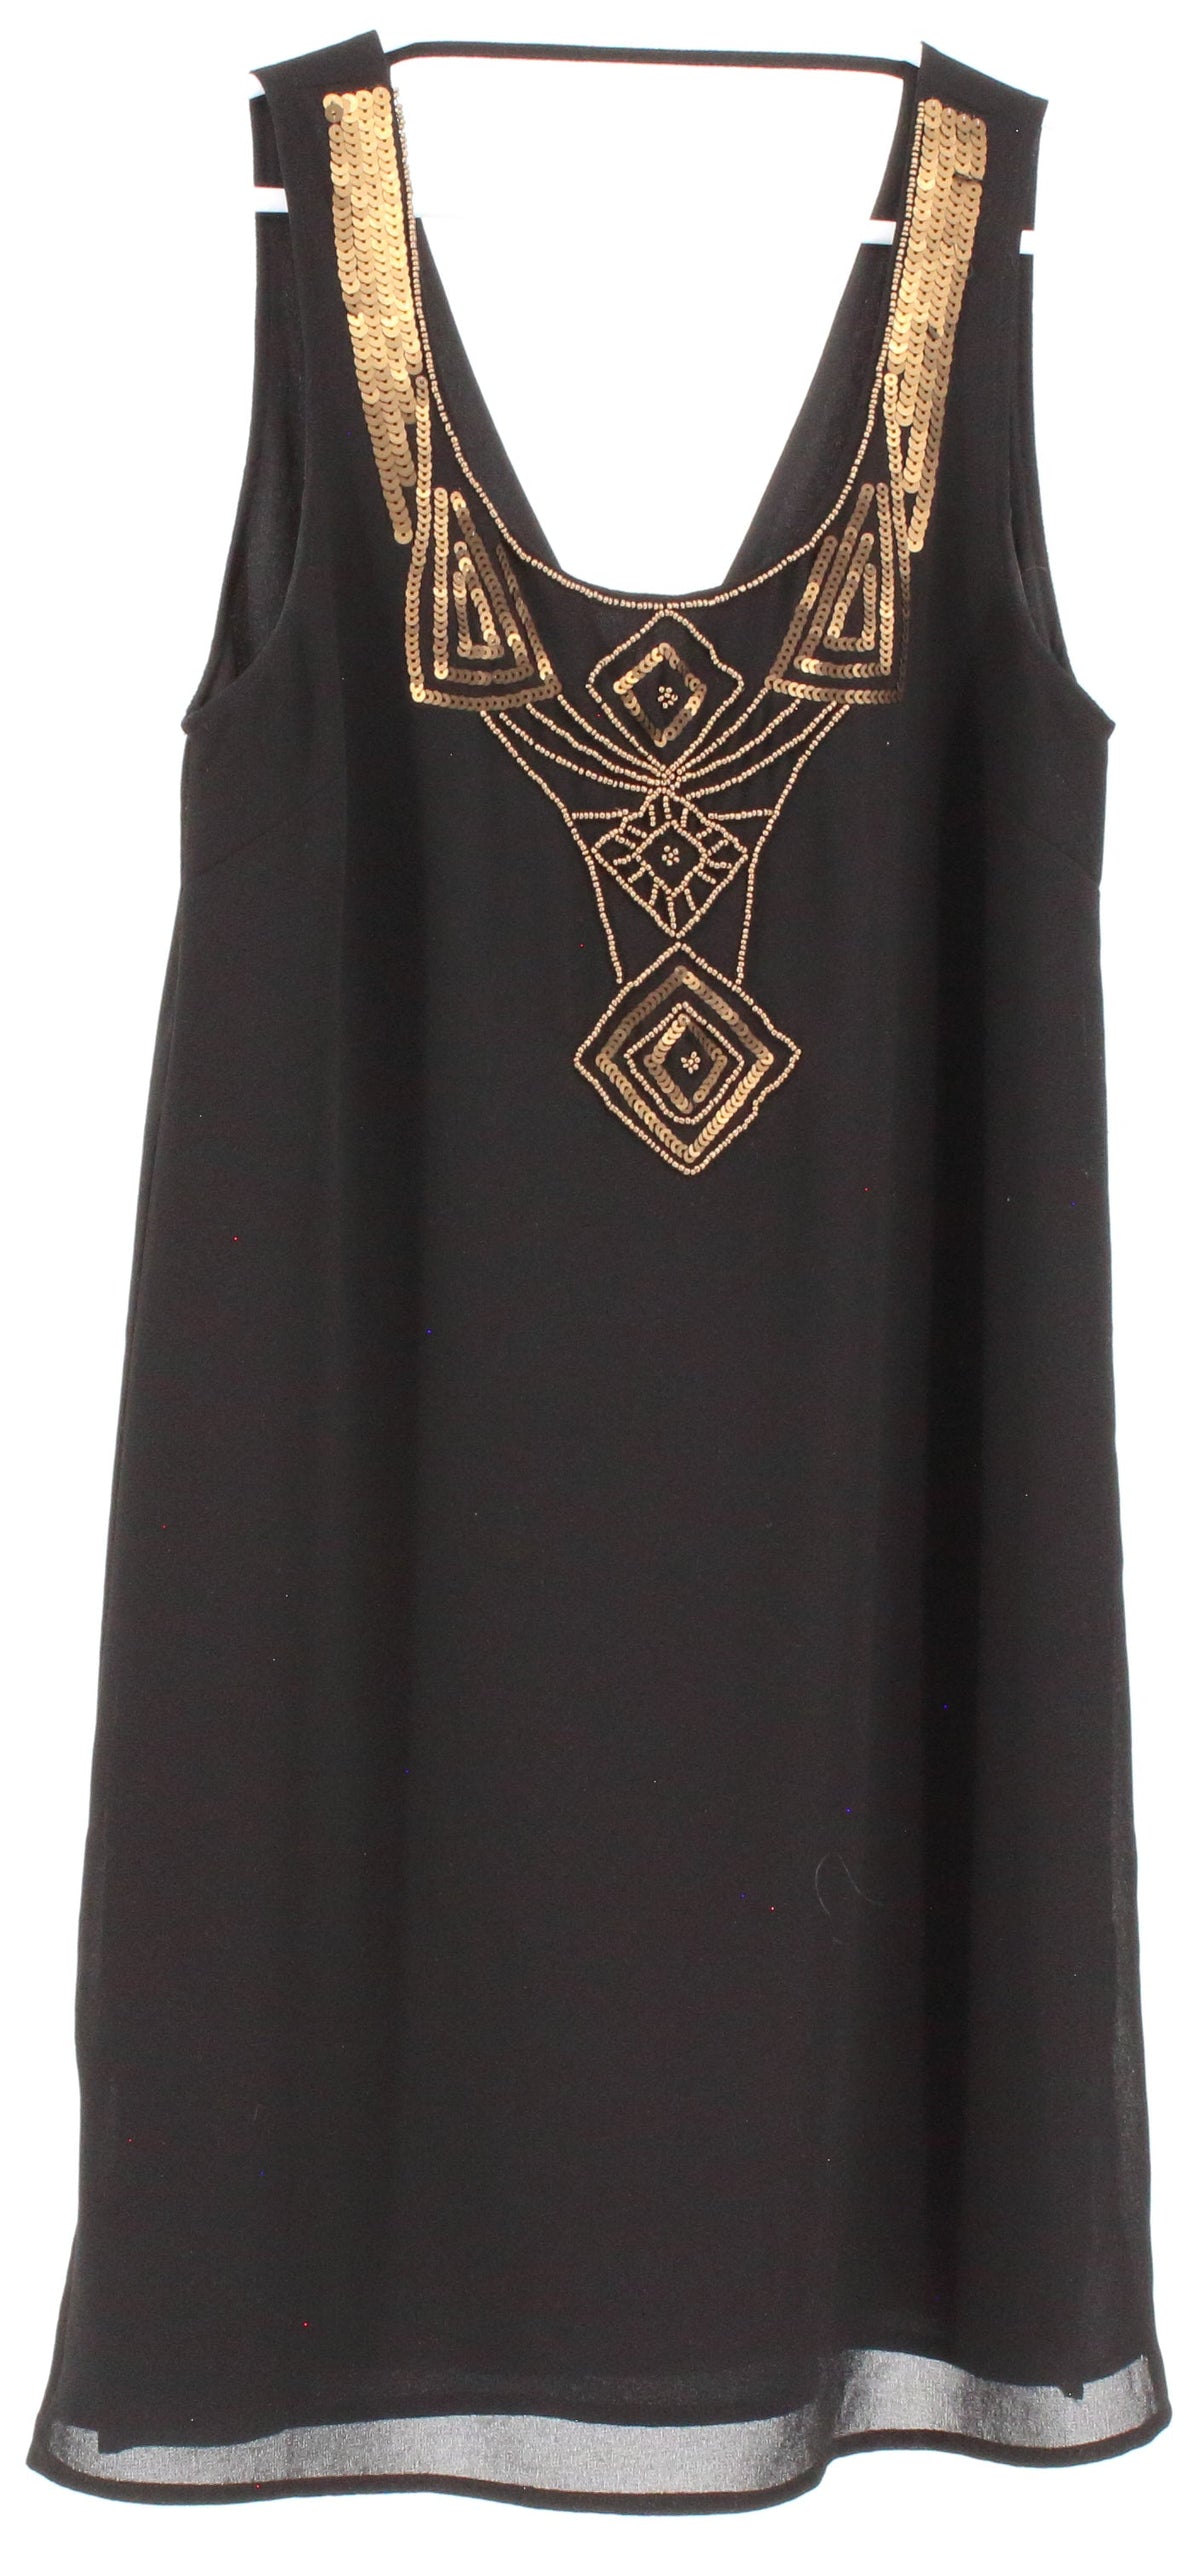 Made For Impulse Black With Golden Bead Detailing Dress